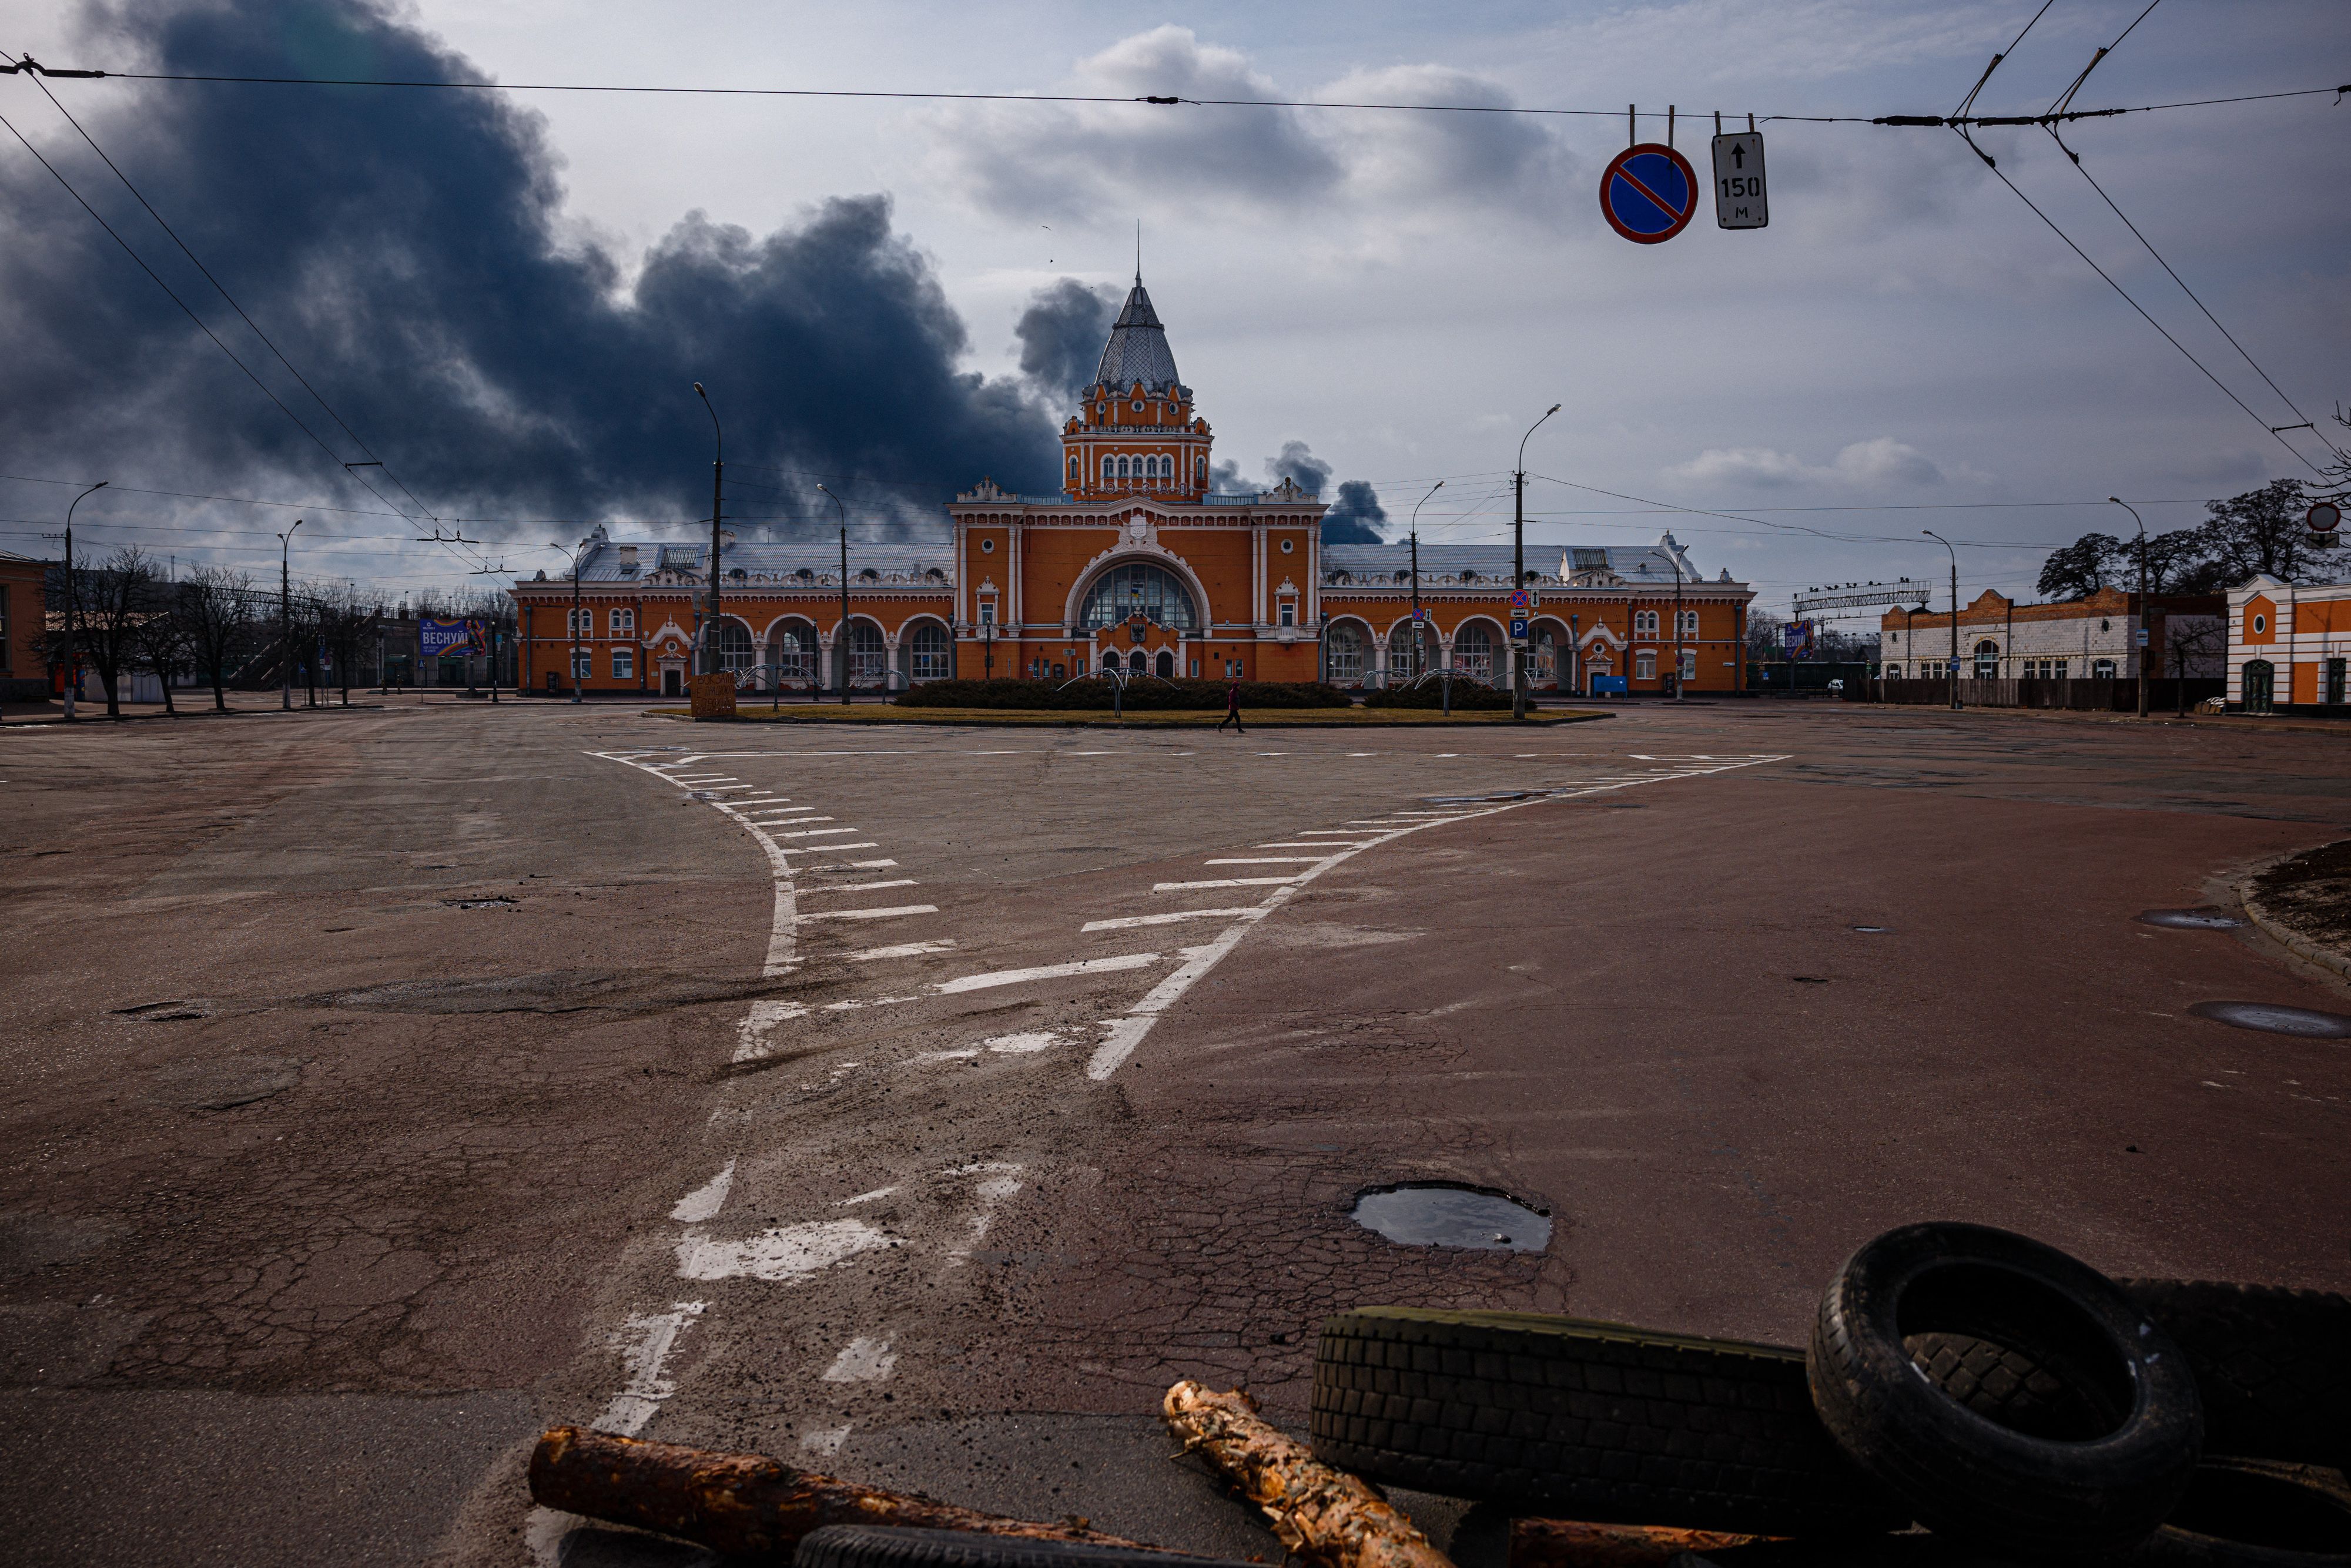 A large red building with arches has black smoke behind it